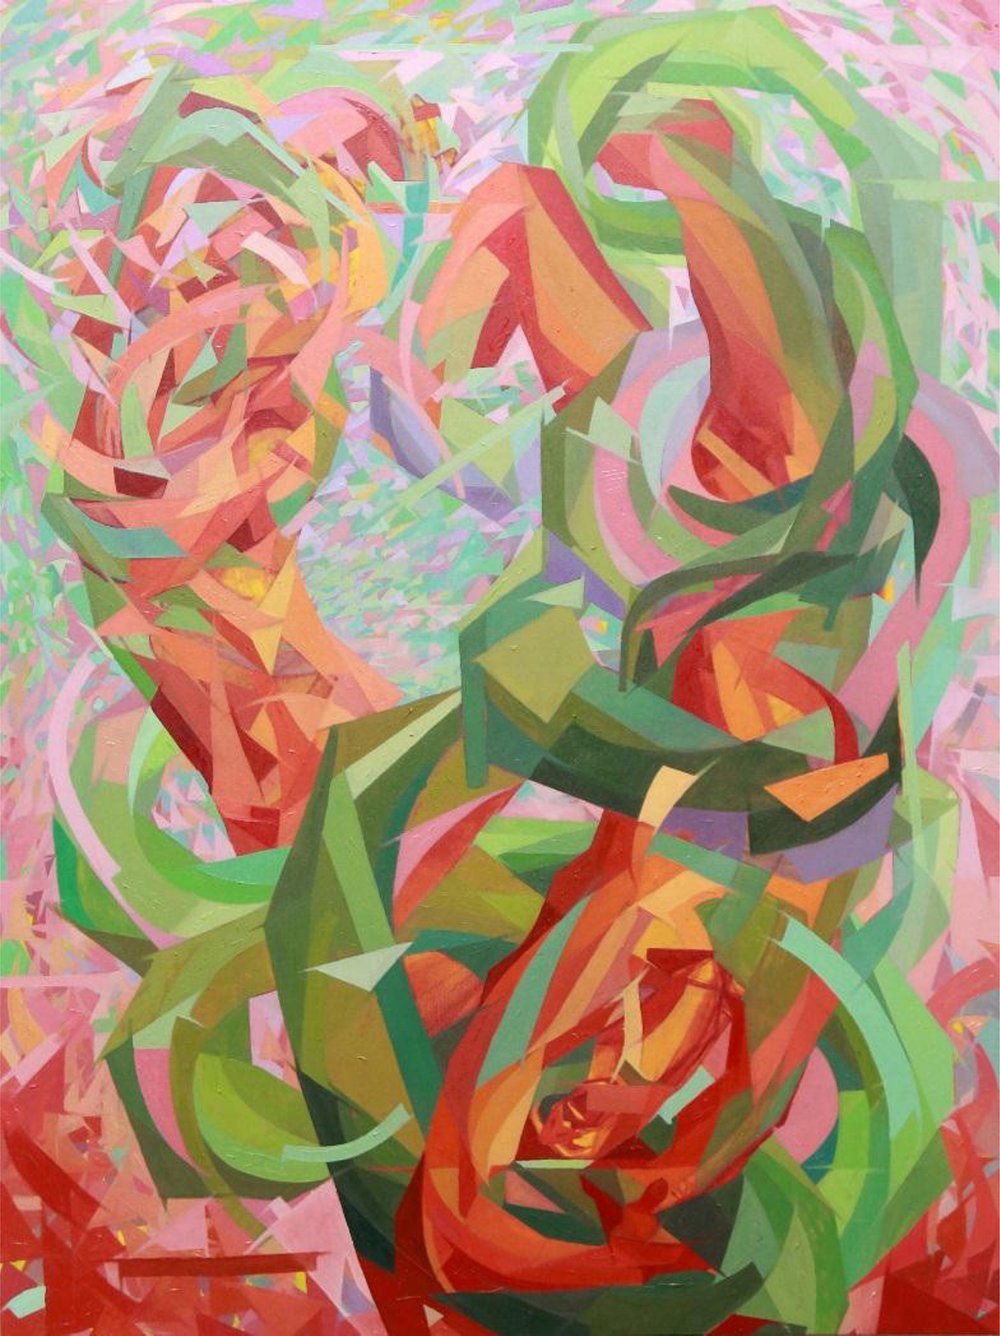 This is a painting of an abstract pattern featuring bright colors and intricate shapes. The background is predominantly pink, with green accents throughout the composition. A variety of leaves are scattered across the canvas in various shades of yell